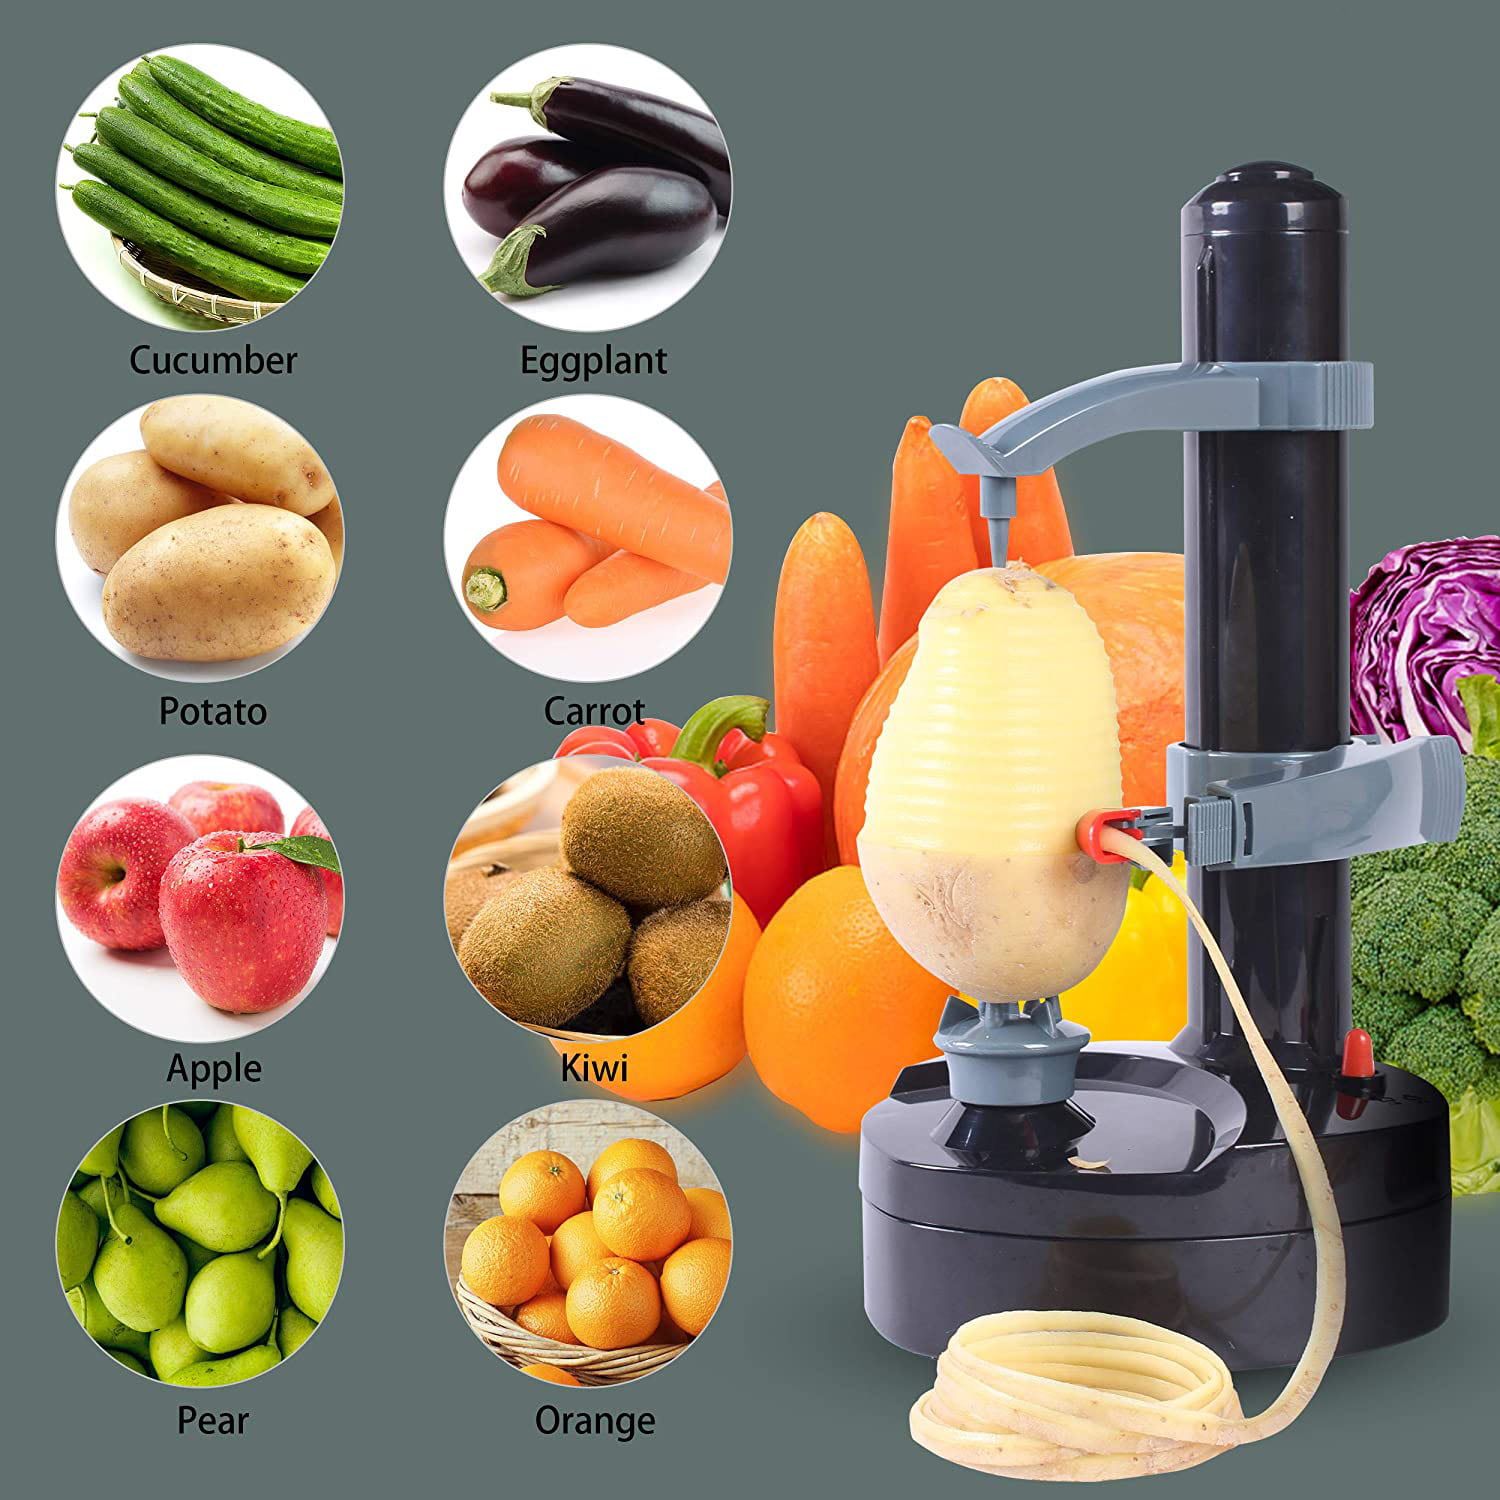 YESJrl Electric Potato Peeler/Salad Spinner/Fully Automatic Potato Peeling  Machine with Vegetable Dryer, One-Touch Operation